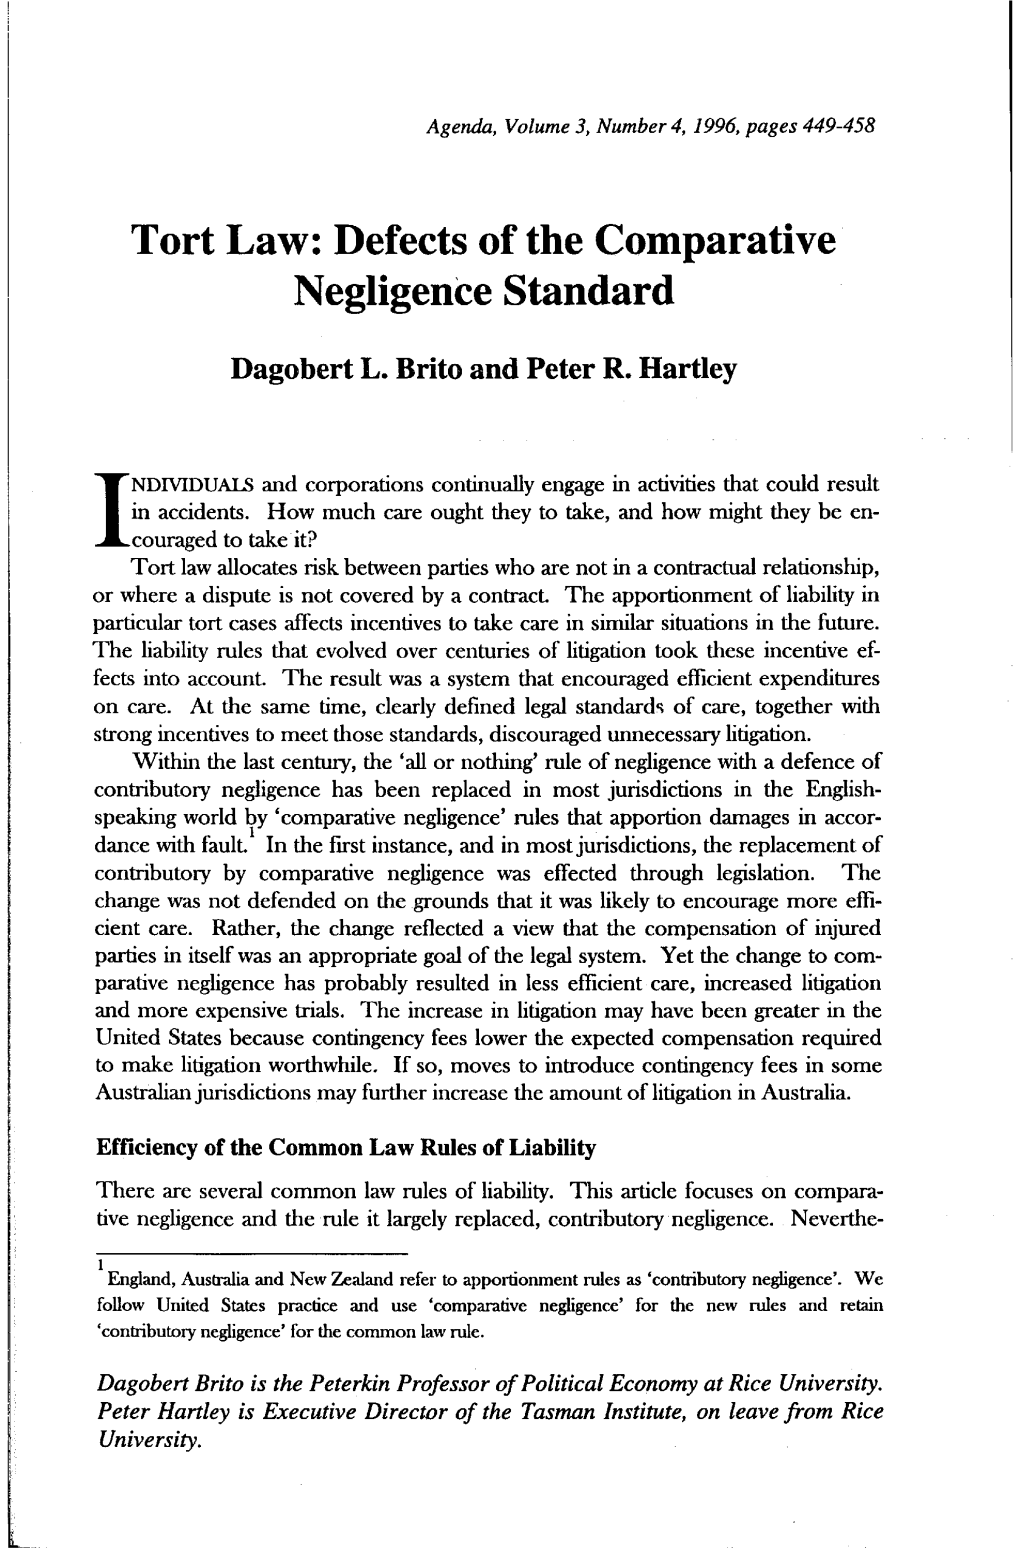 Tort Law: Defects of the Comparative Negligence Standard